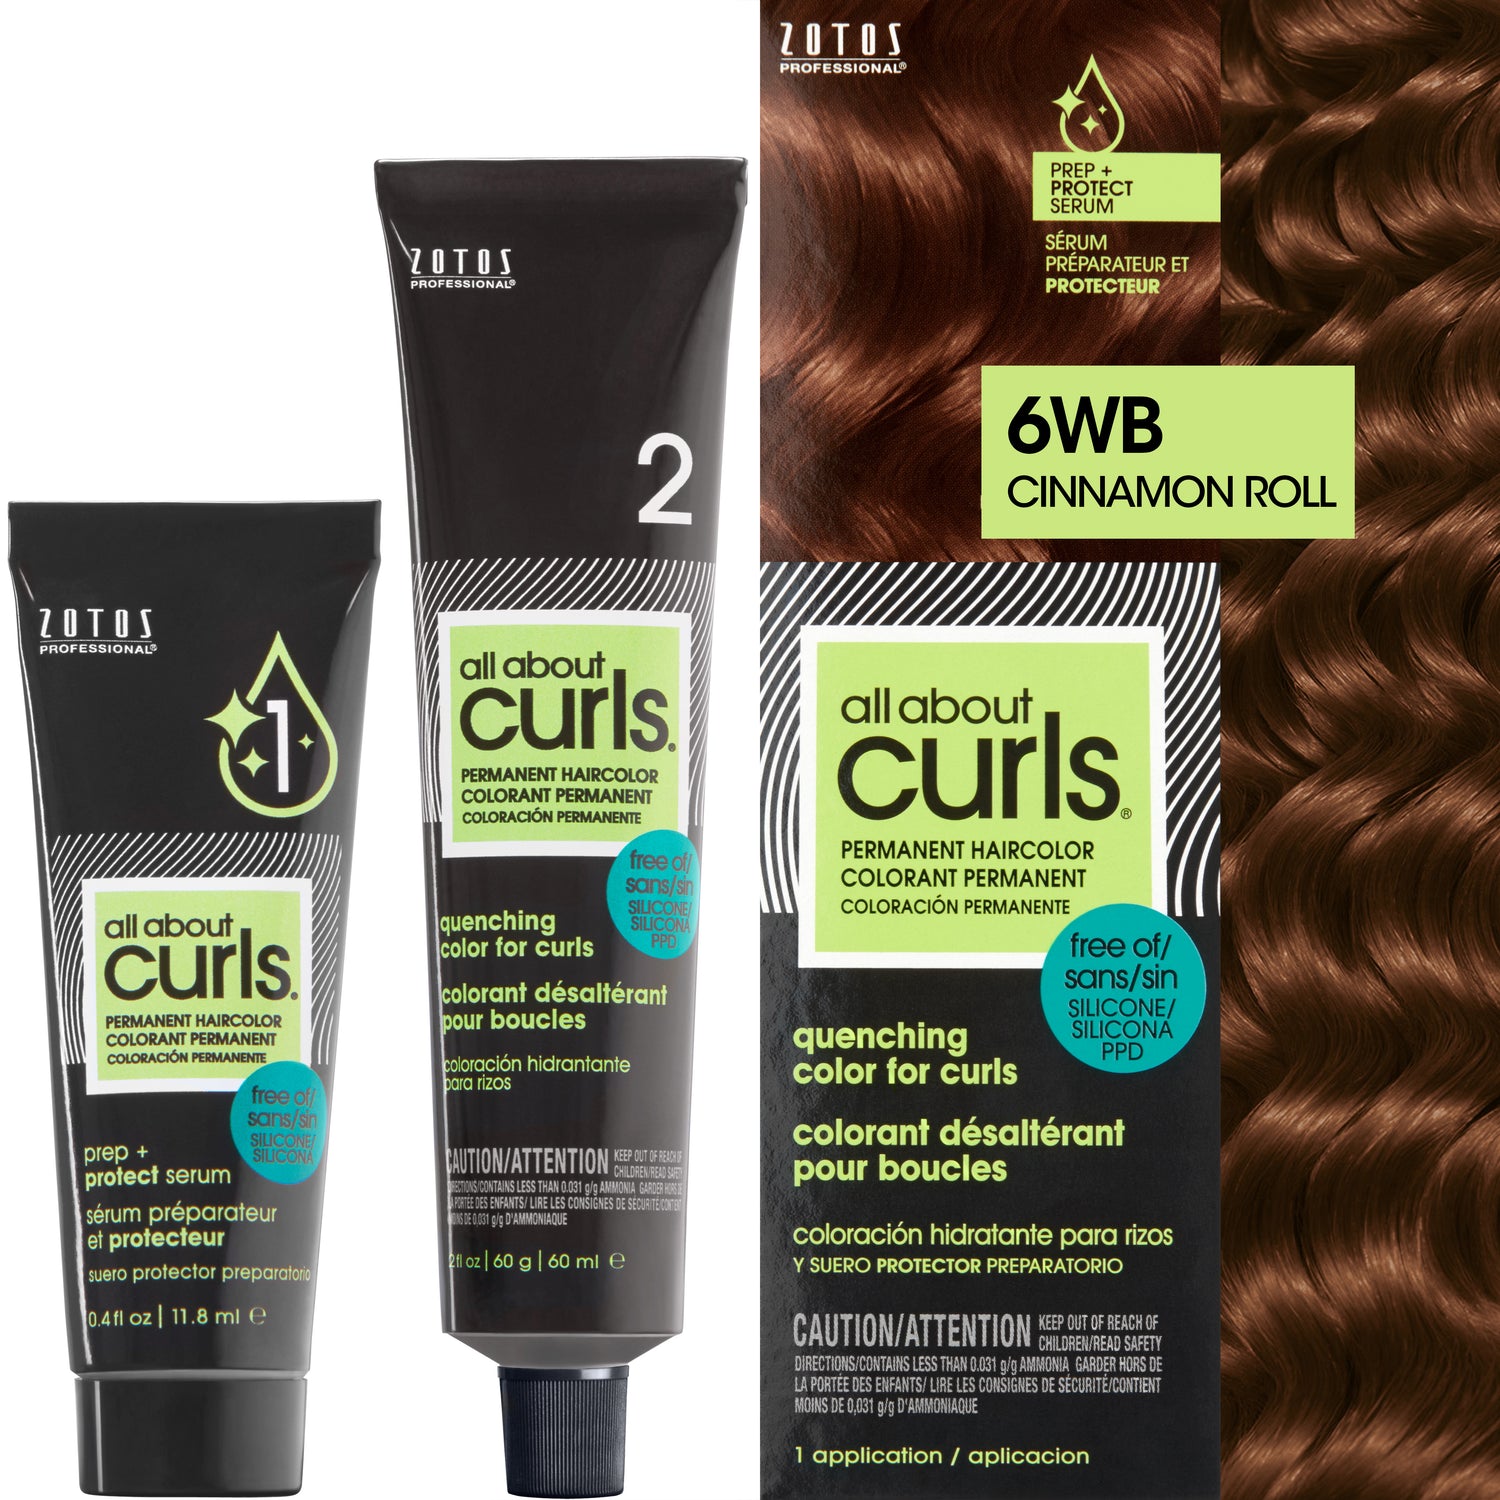 Two bottles and packaging for All About Curls Permanent Color in shade 6WB Cinnamon Roll.